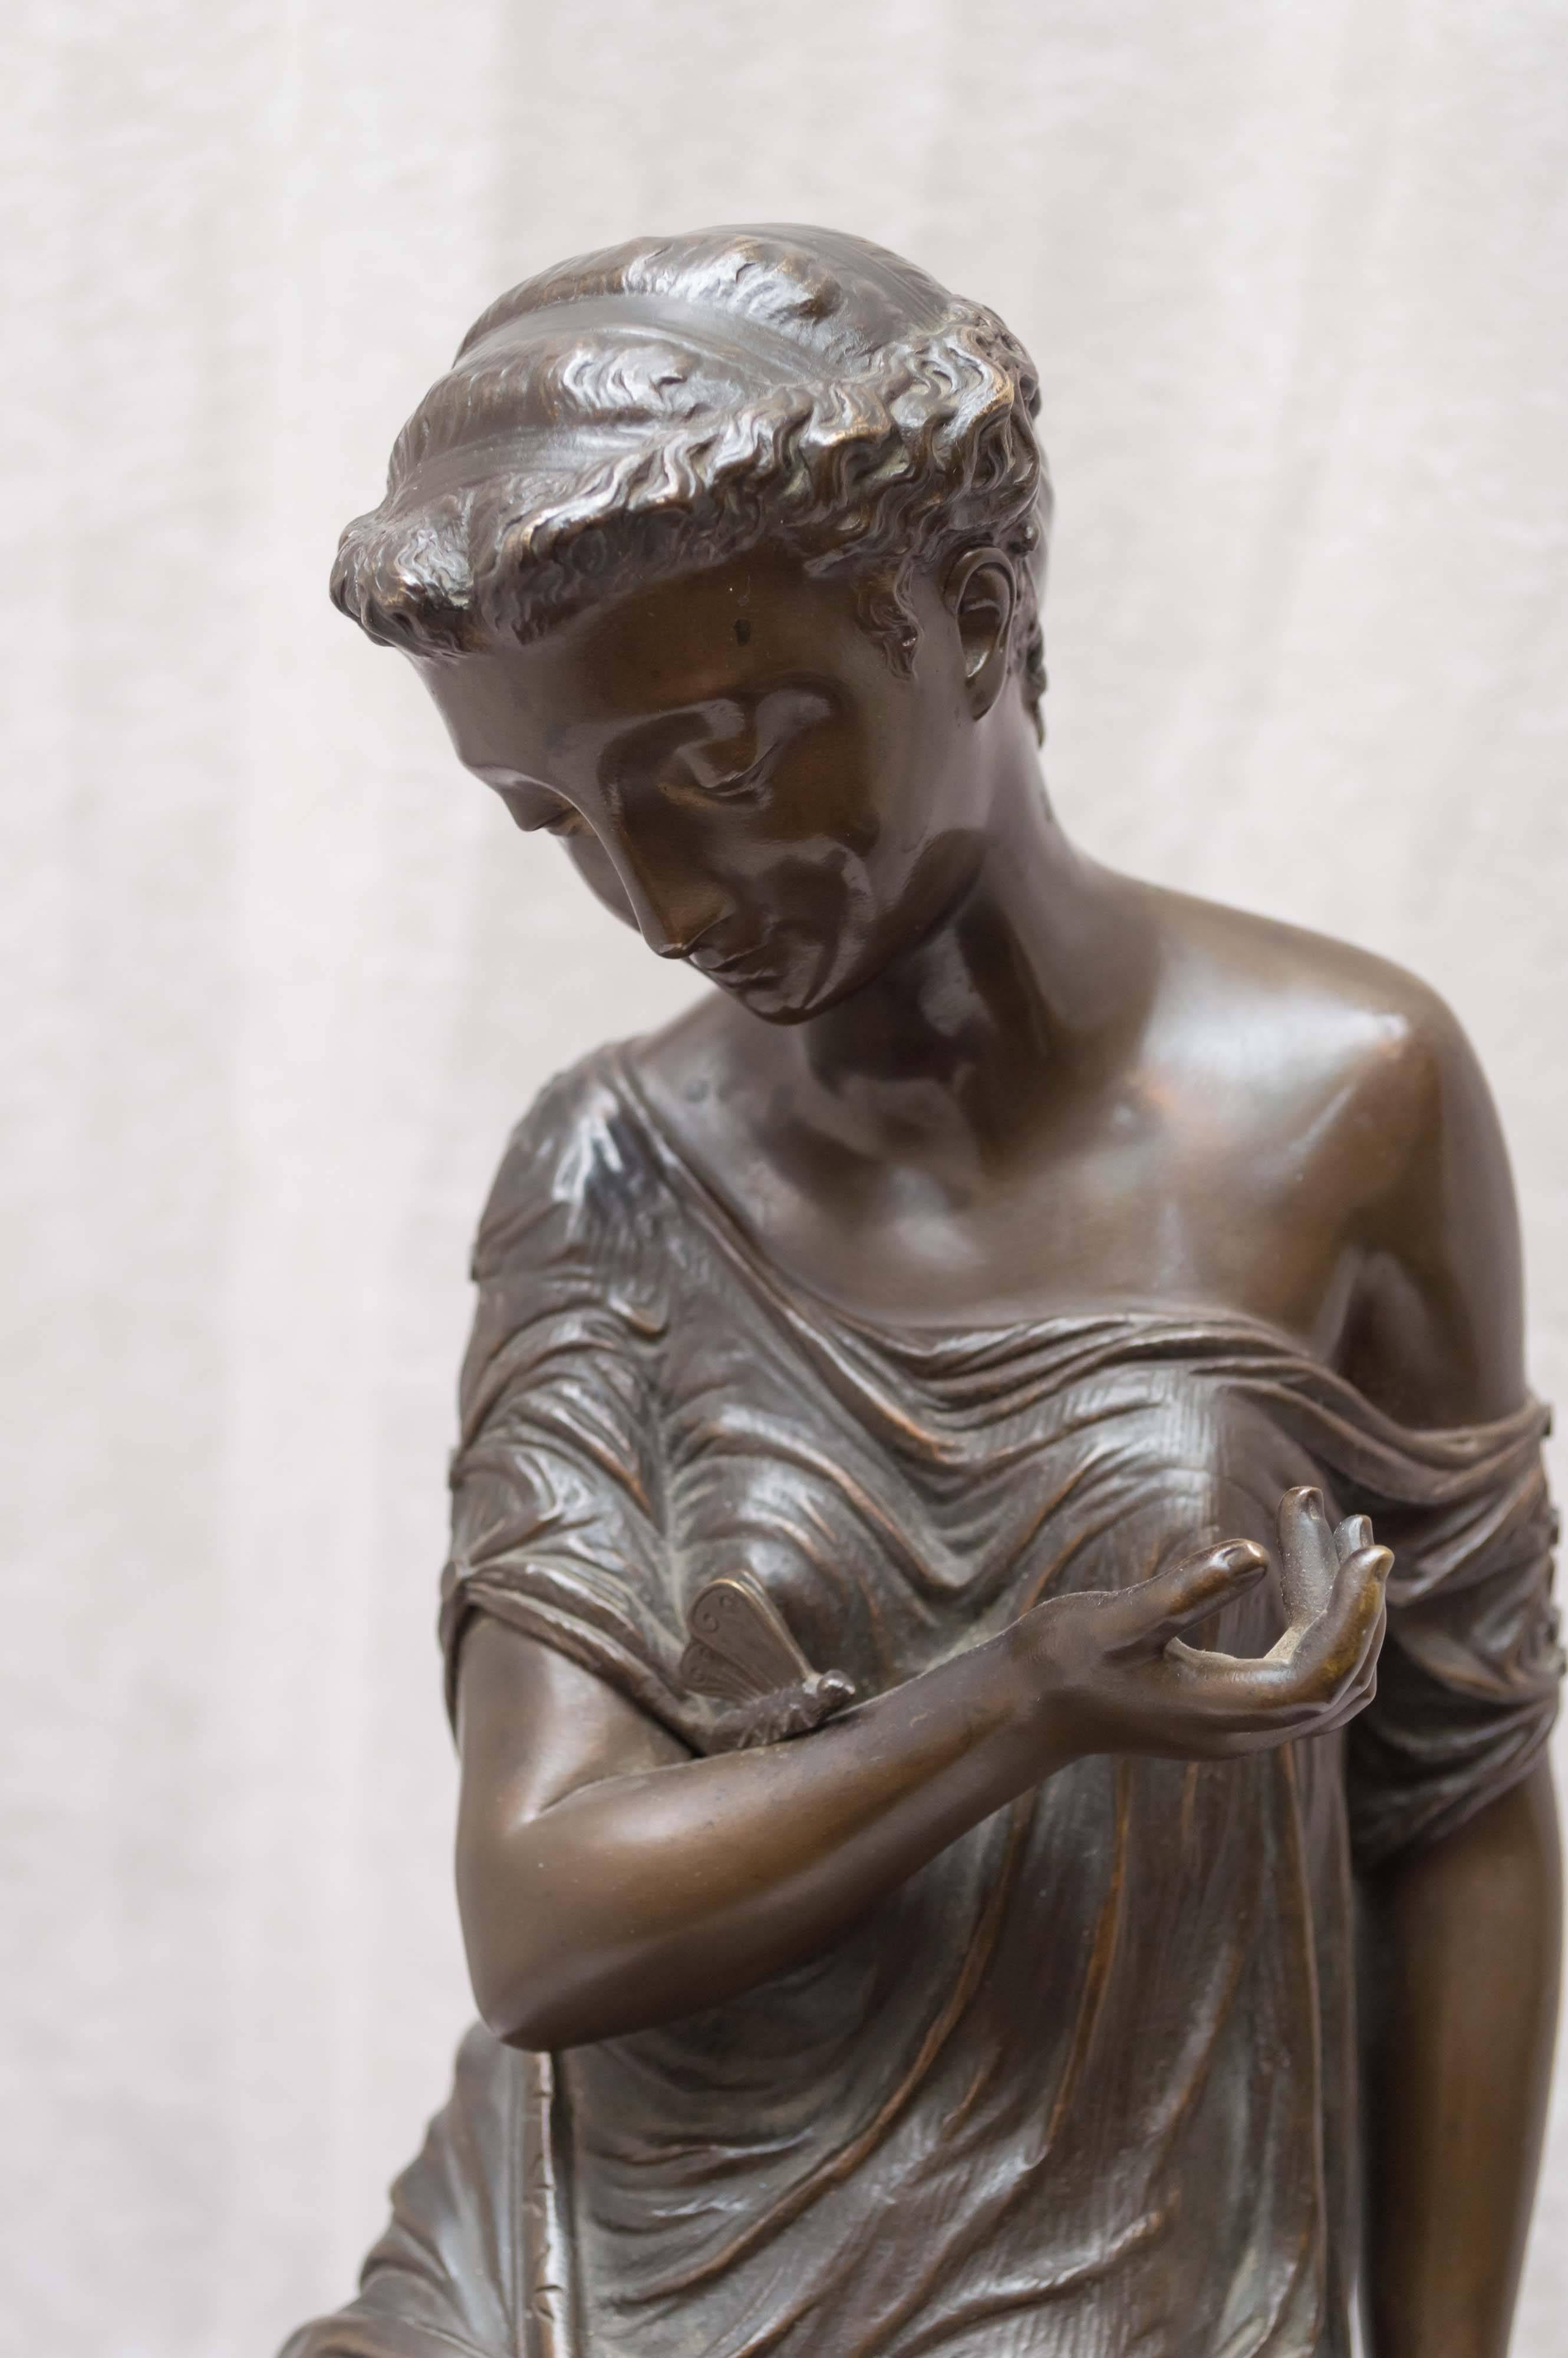 This captivating bronze is a fine example of the beauty of neoclassical design. Her flowing gown and innocent look are just two of the characteristics of this sought after style. Artist signed J.C.deBlezer.
Joseph-Charles deBlezer was born in